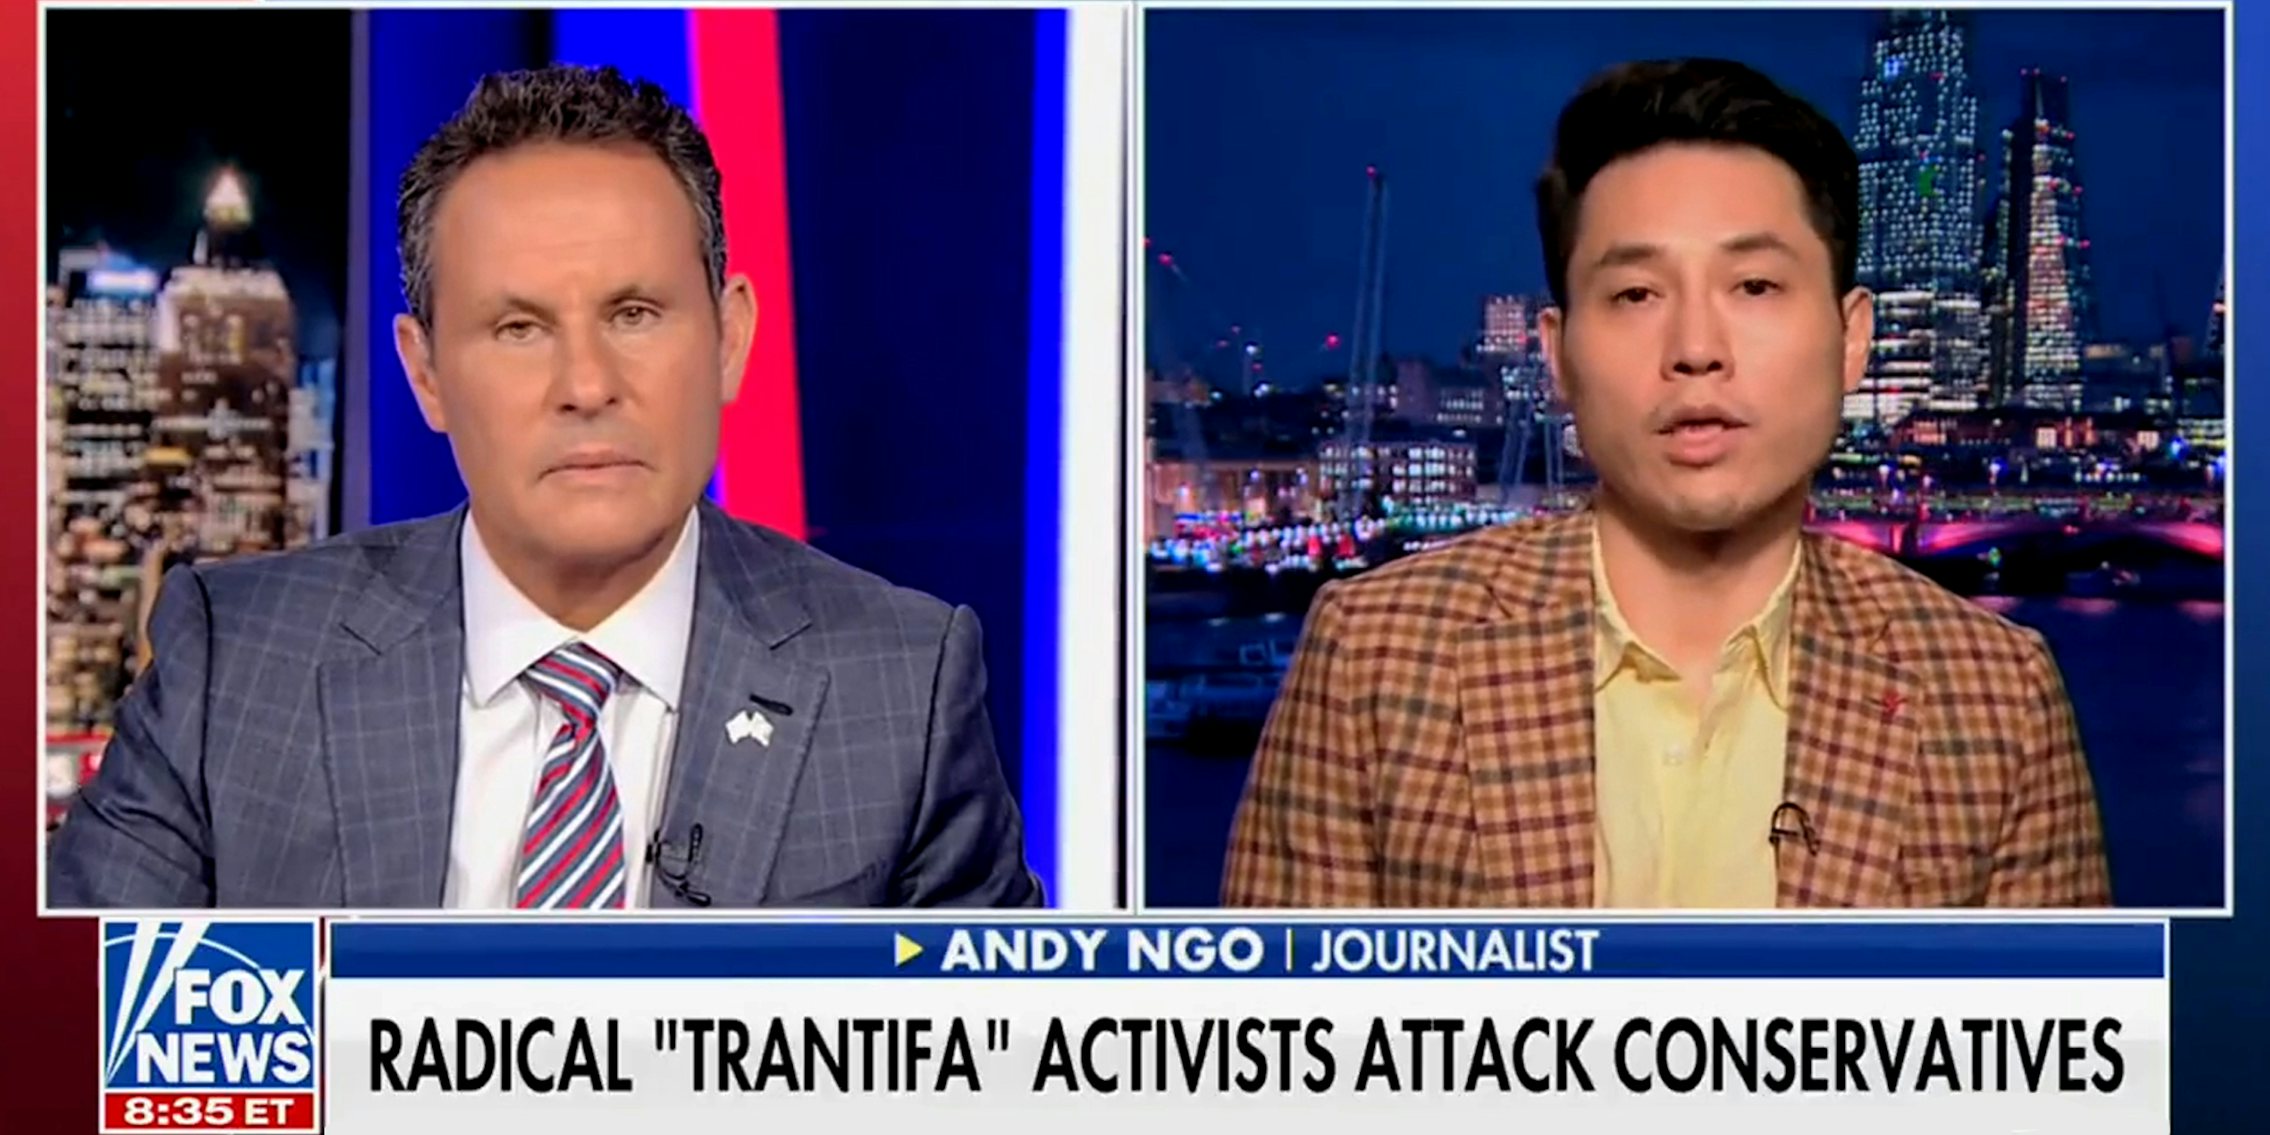 Andy Ngo on Fox News with caption 'RADICAL 'TRANTIFA' ACTIVISTS ATTACK CONSERVATIVES' in front of red and blue city background